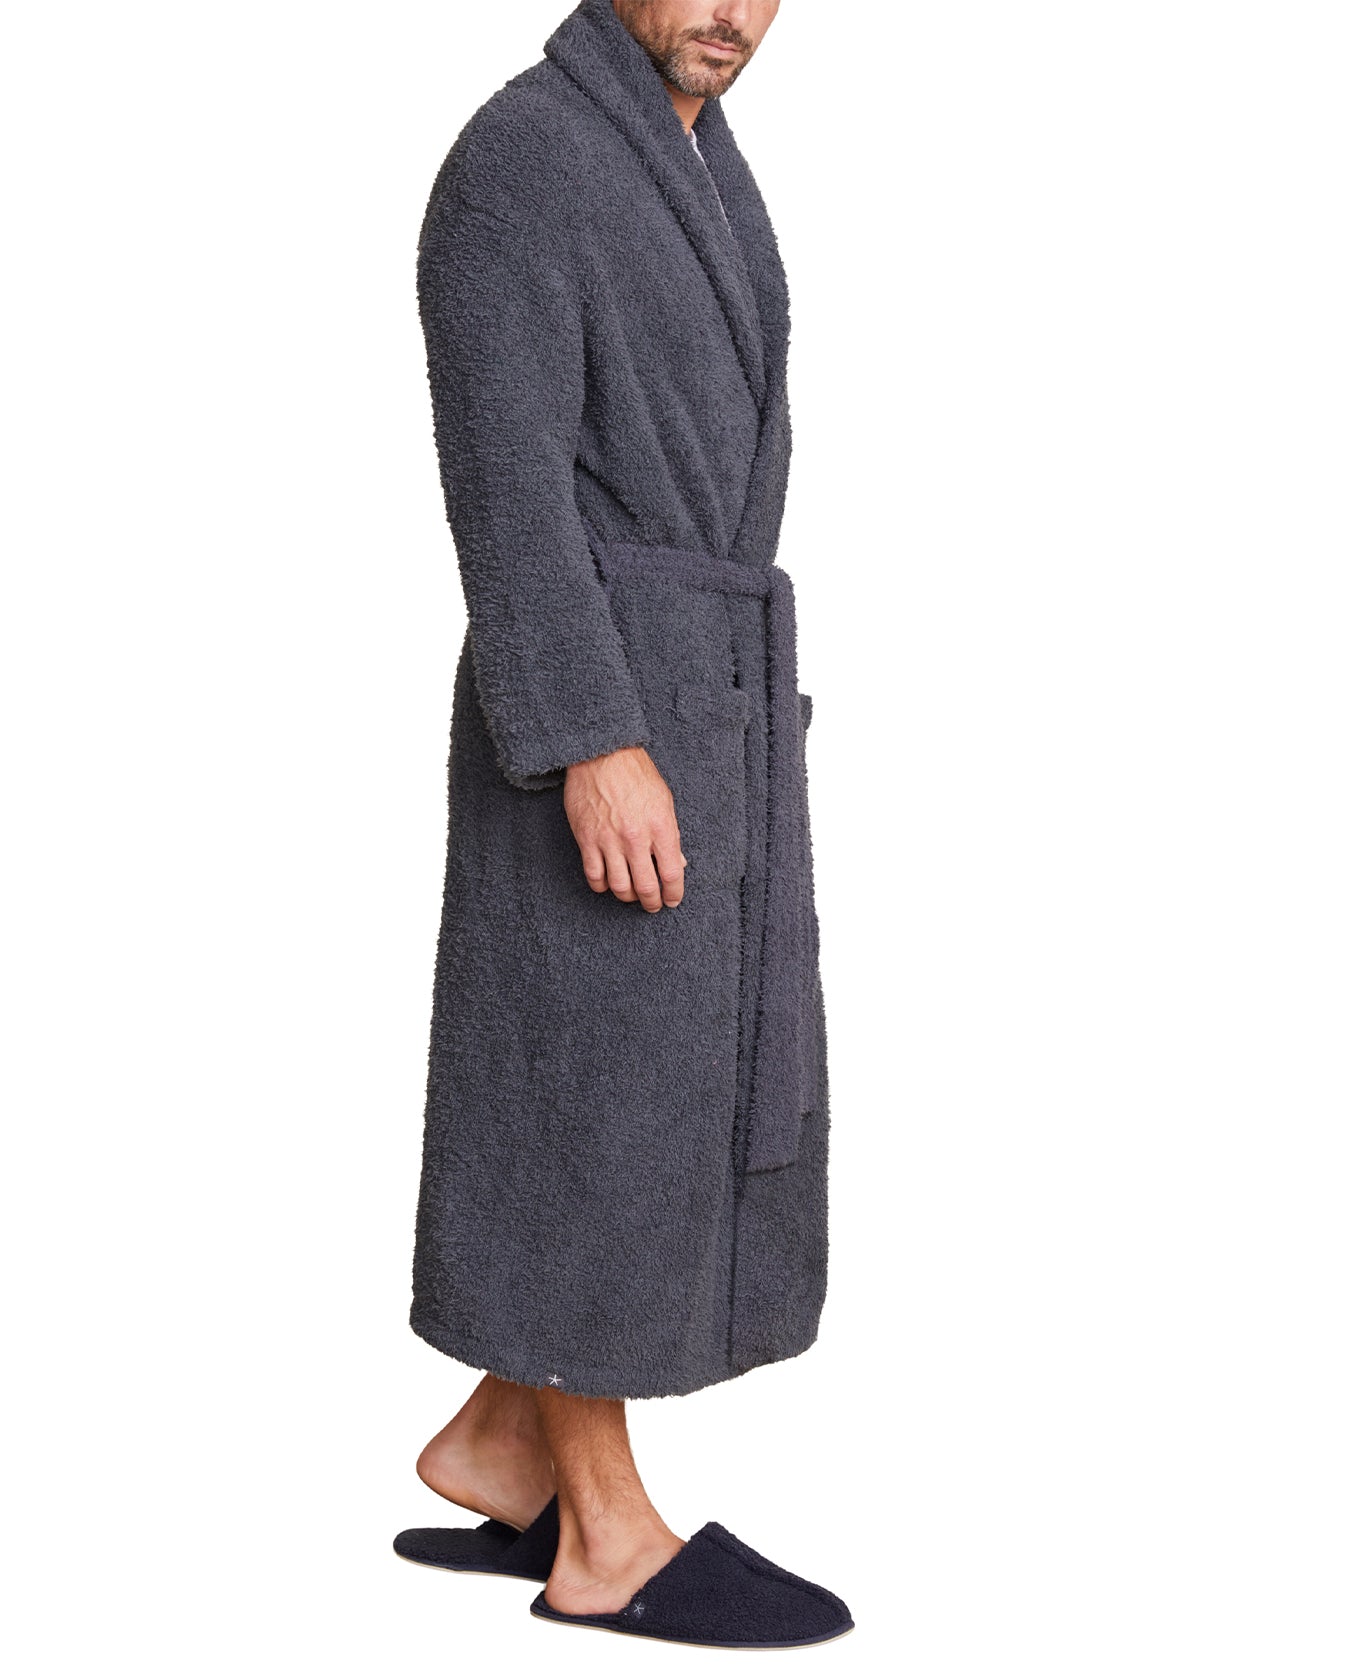 Limited Edition: Oprah Daily Live Your Best Life™ CozyChic Adult Robe